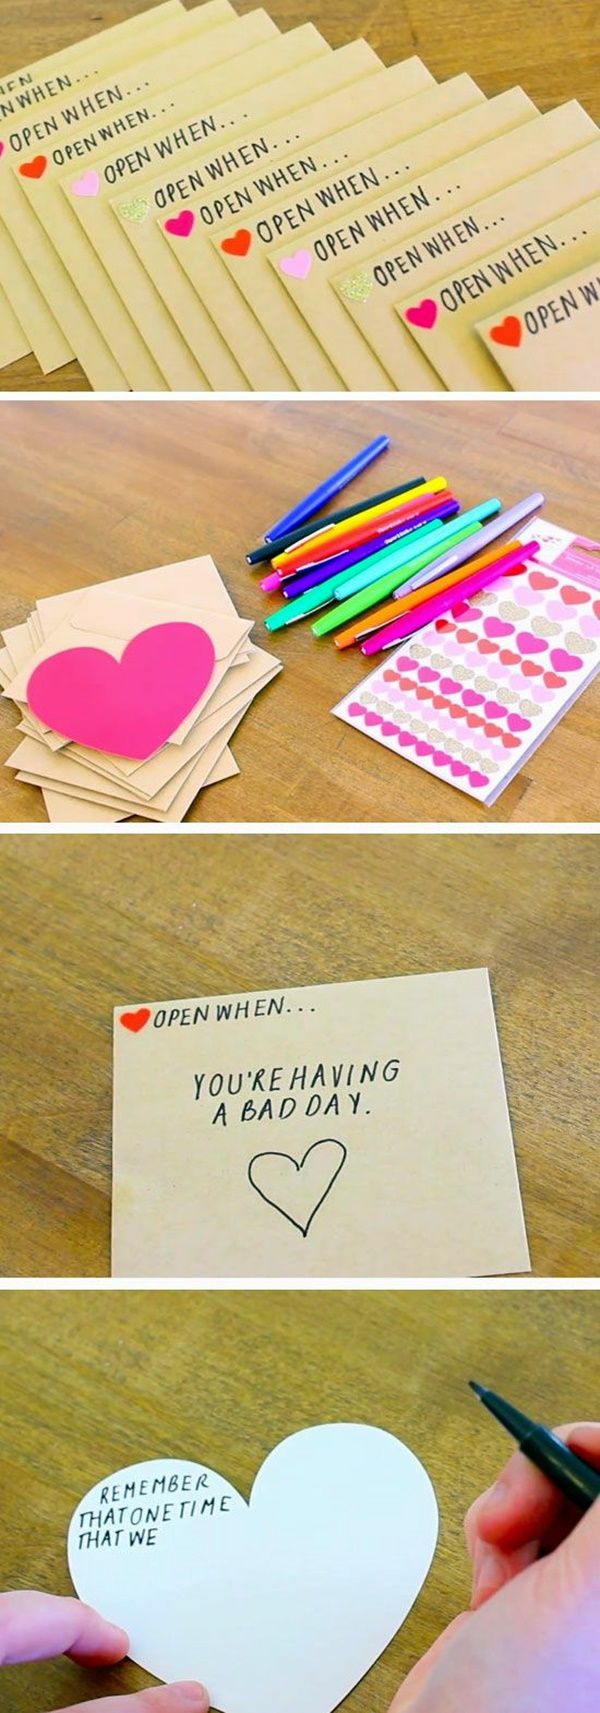 Meaningful Gift Ideas For Boyfriend
 101 Homemade Valentines Day Ideas for Him that re really